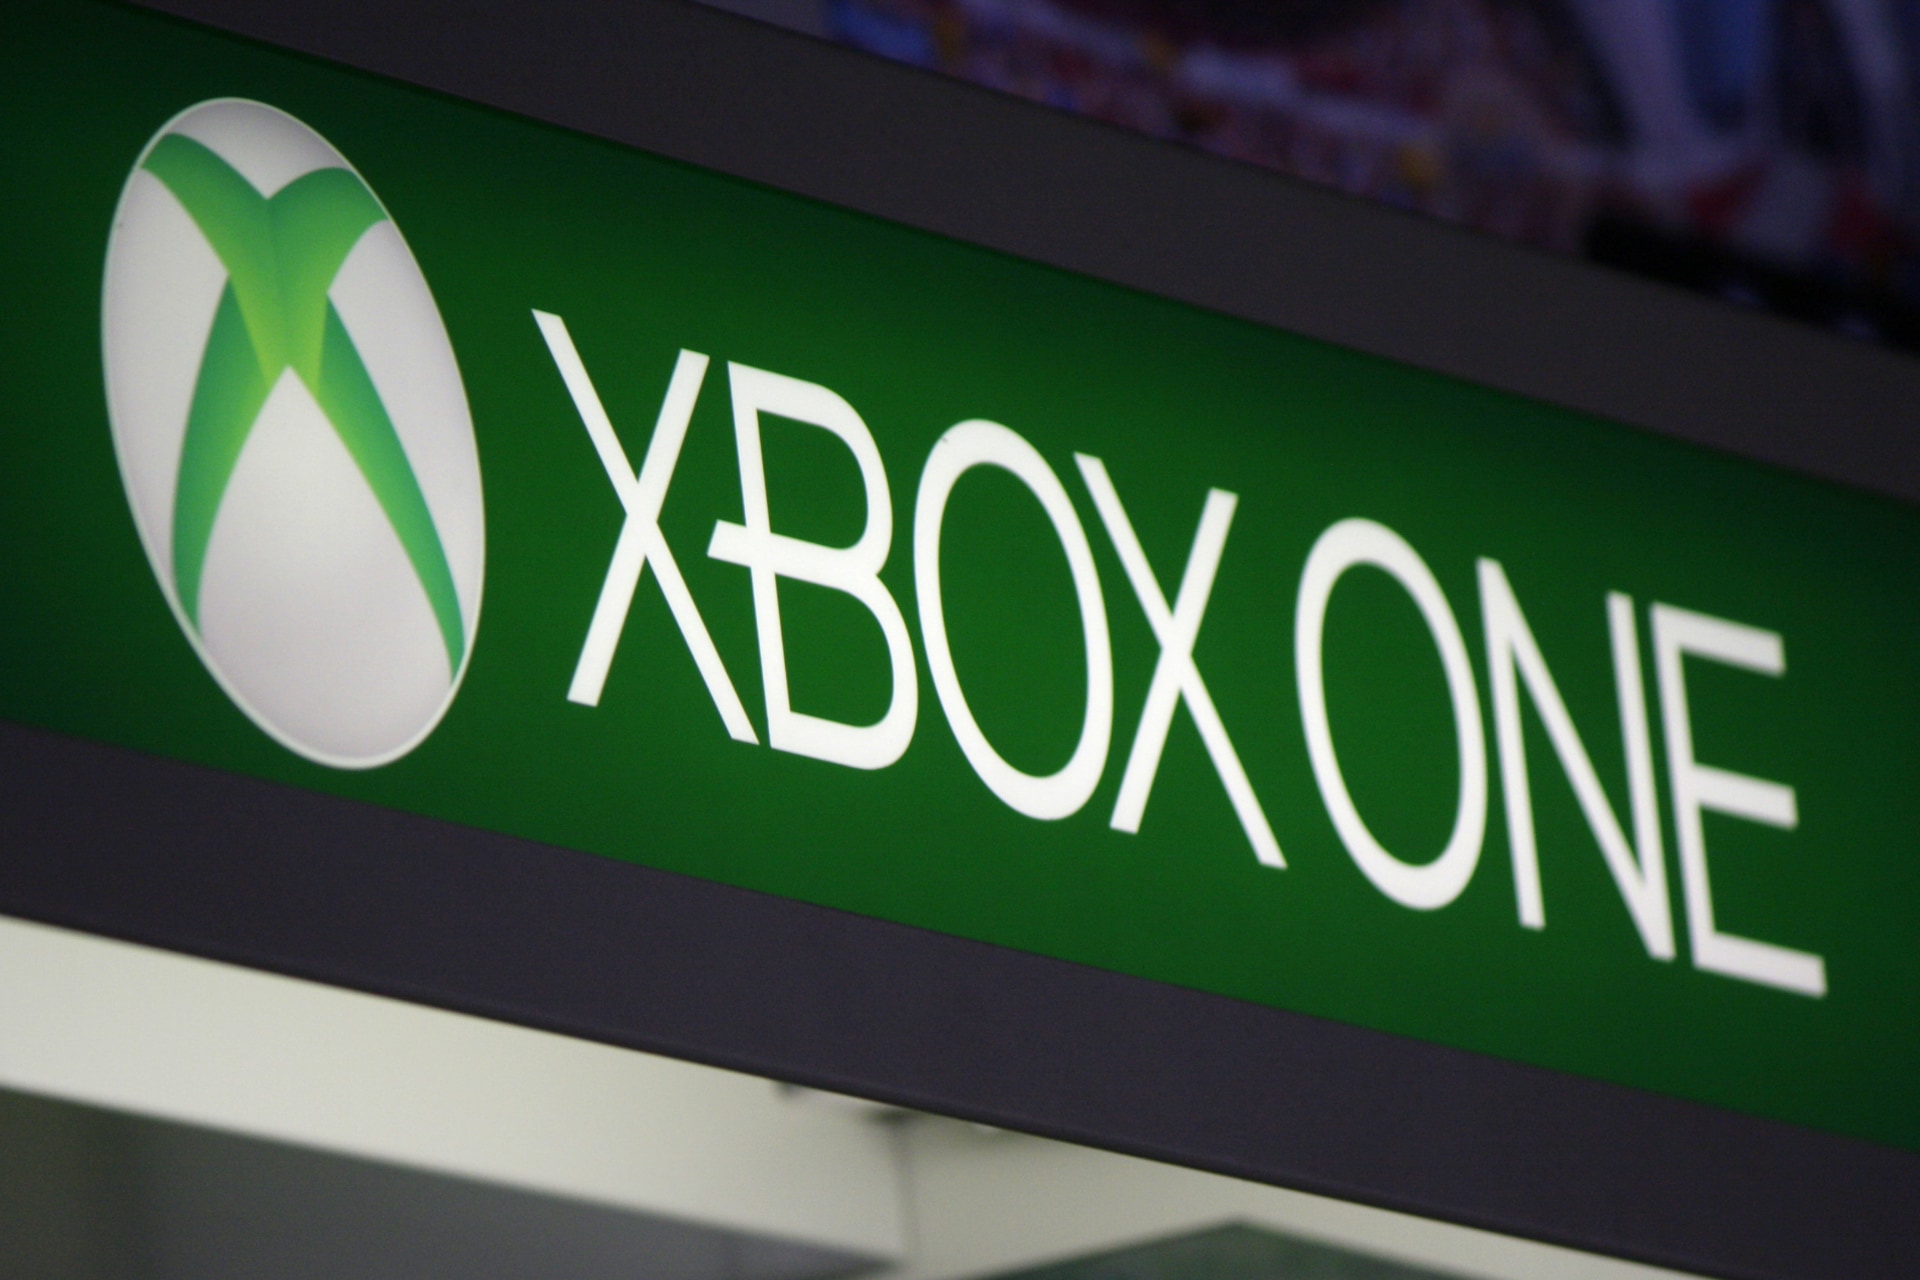 Xbox One may get next-gen games